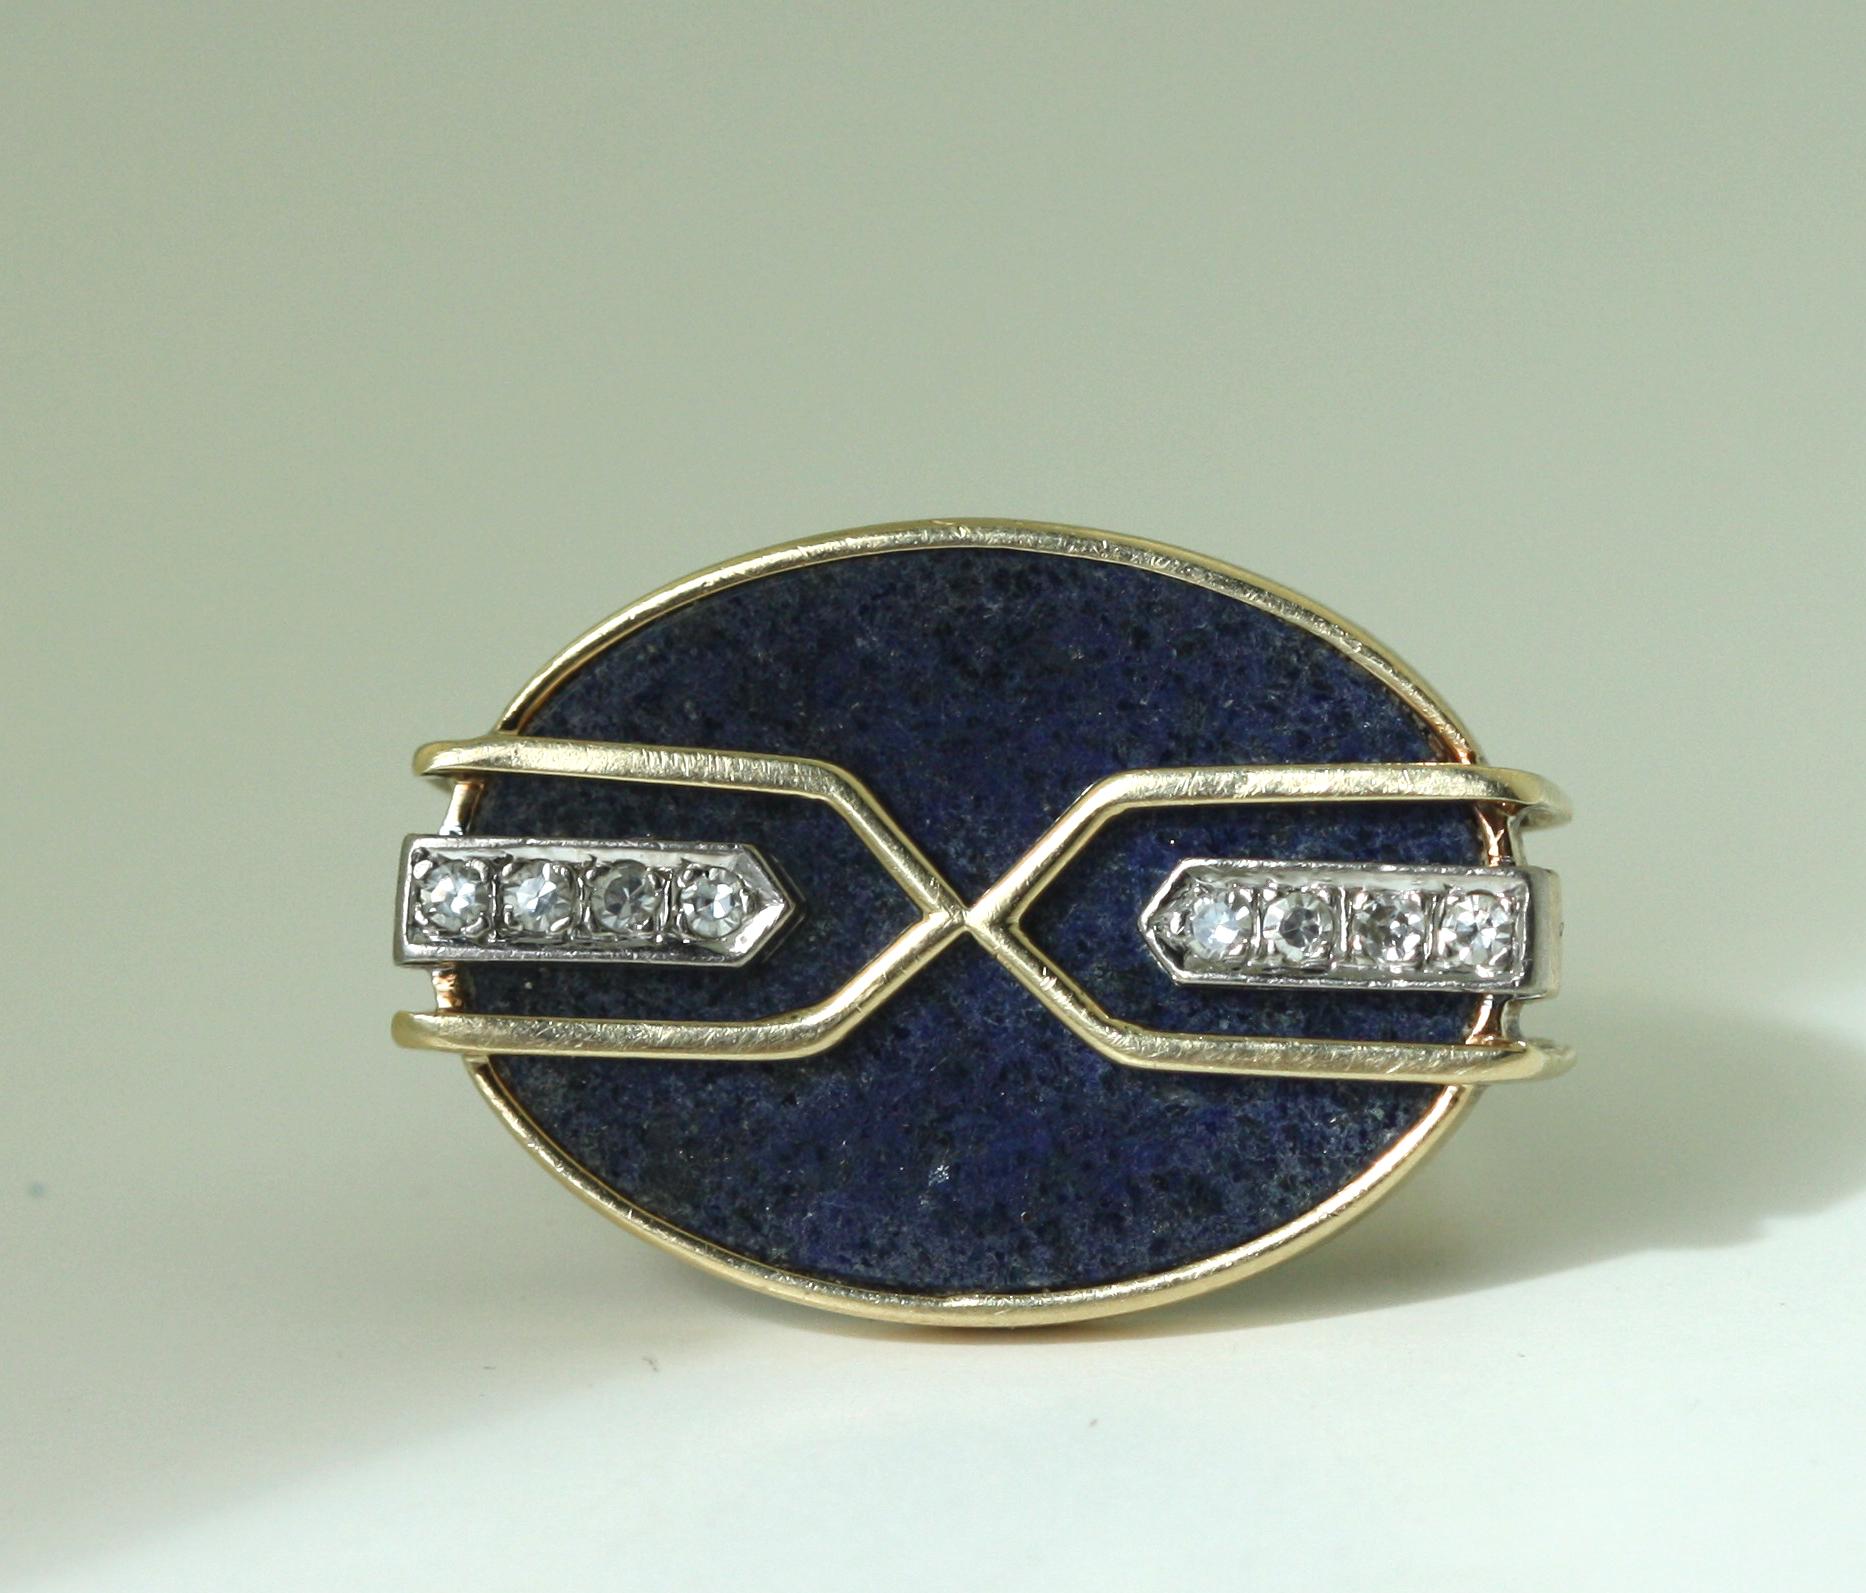 
Gold, Diamond and Lapis Lazuli Ring
Of round design, composed of lapis lazuli and round brilliant cut diamonds.
Diamonds weighing a total of approximately .40 carats
12 karat yellow gold
Total weight 7.50 grams
Size 5 1/2